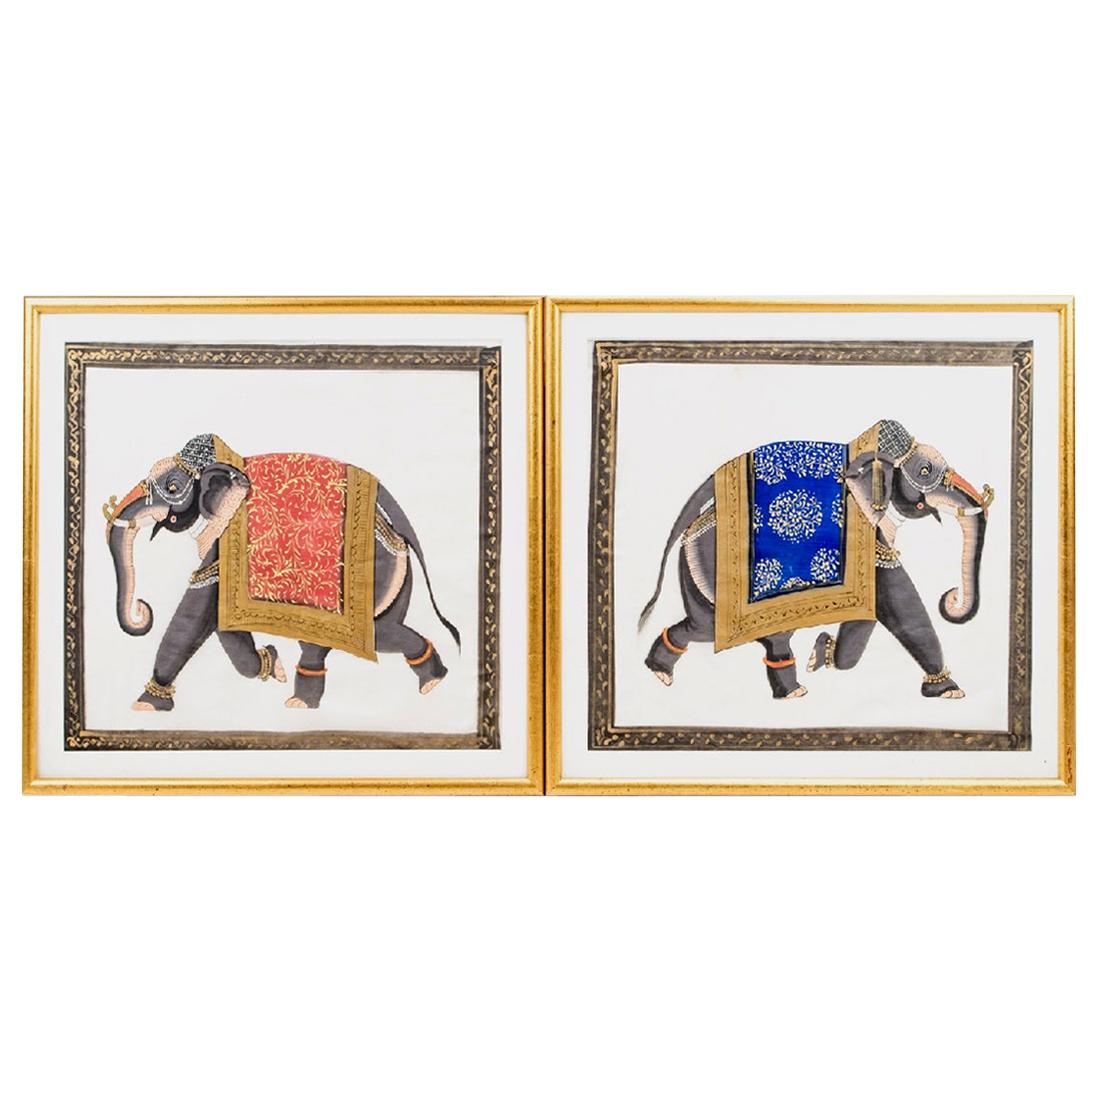 Two Elephants, Mixed Technique on Paper, 1950s